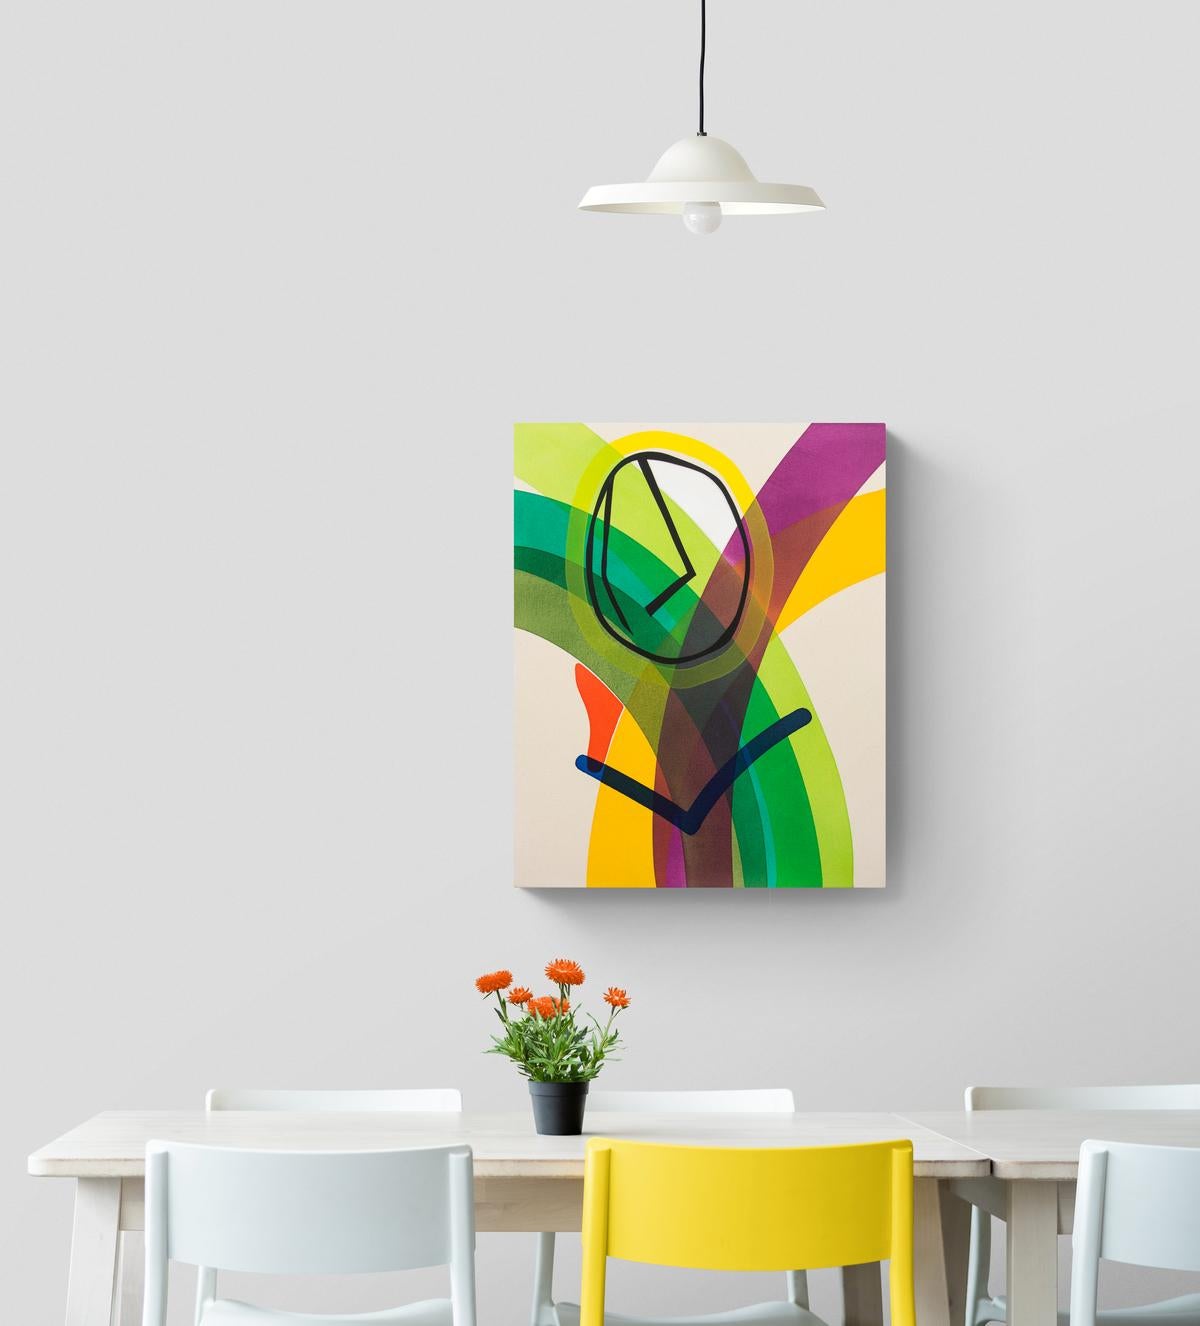 This engaging figurative piece in bold abstract shapes and brilliant colours was painted by Aron Hill. The Calgary artist uses arcs of pure colour—purple, lime green, turquoise and forest green to intersect with a head-like shape outlined in deep